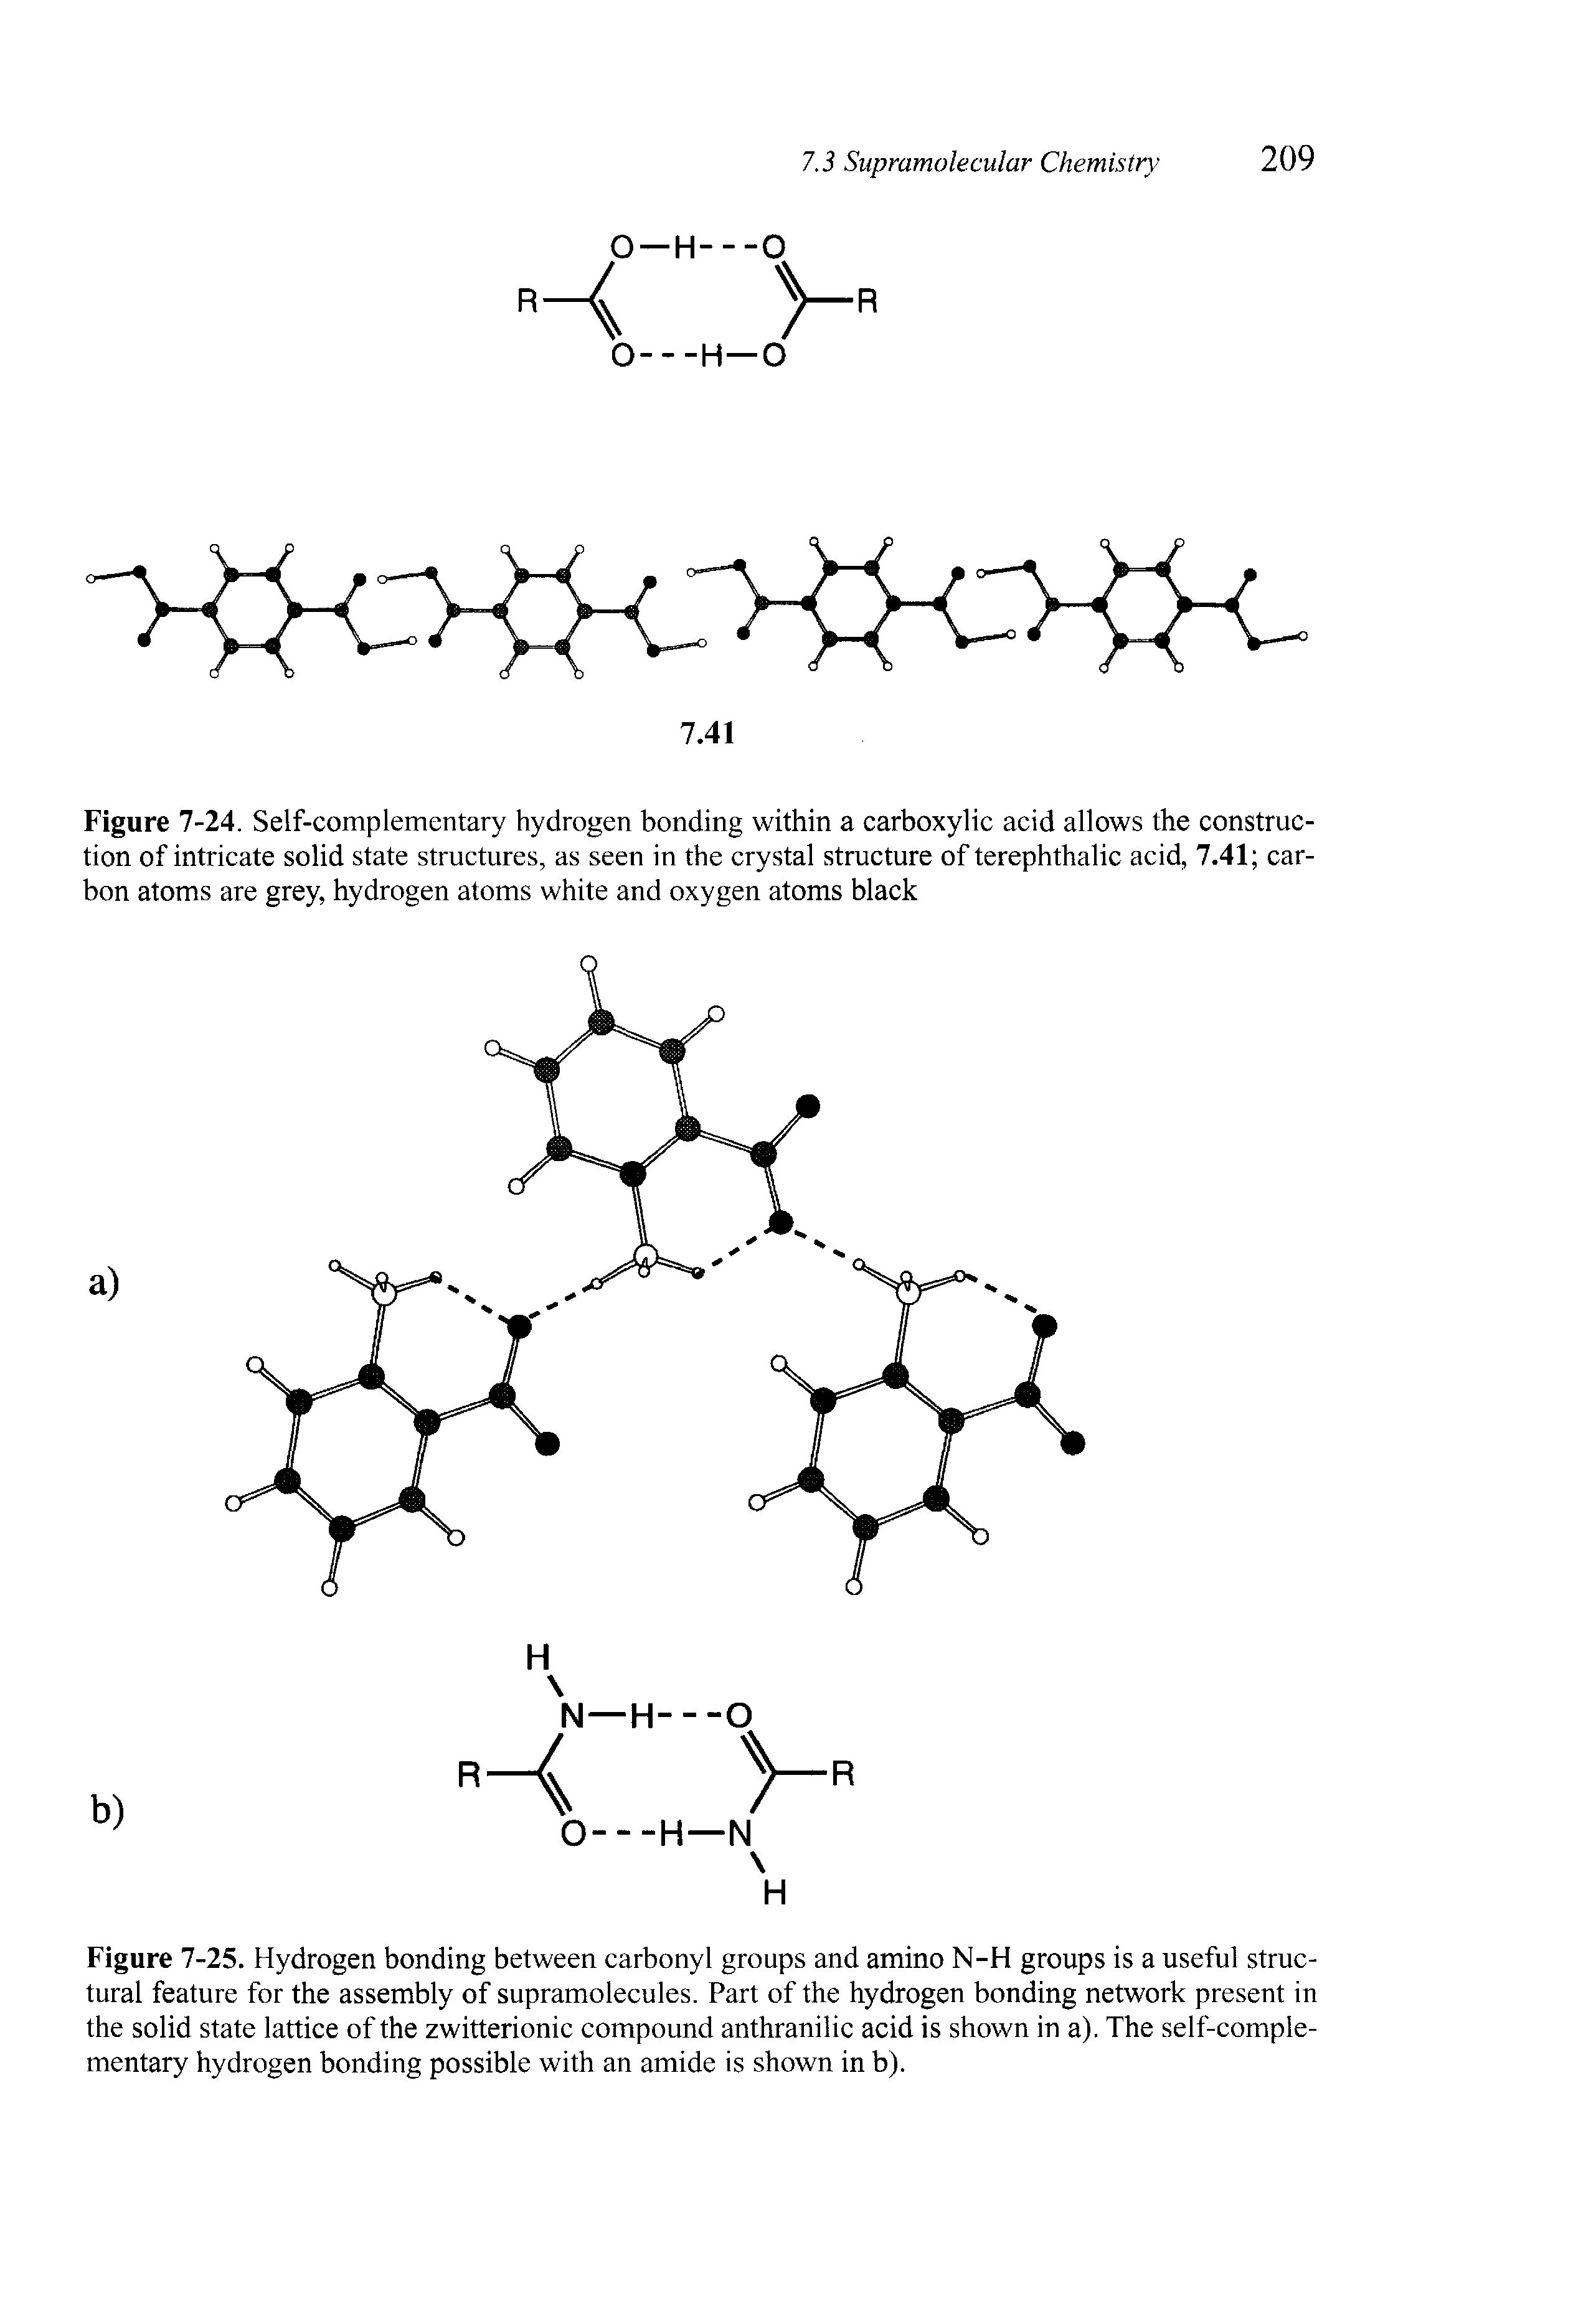 Figure 7-25. Hydrogen bonding between carbonyl groups and amino N-H groups is a useful structural feature for the assembly of supramolecules. Part of the hydrogen bonding network present in the solid state lattice of the zwitterionic compound anthranilic acid is shown in a). The self-complementary hydrogen bonding possible with an amide is shown in b).